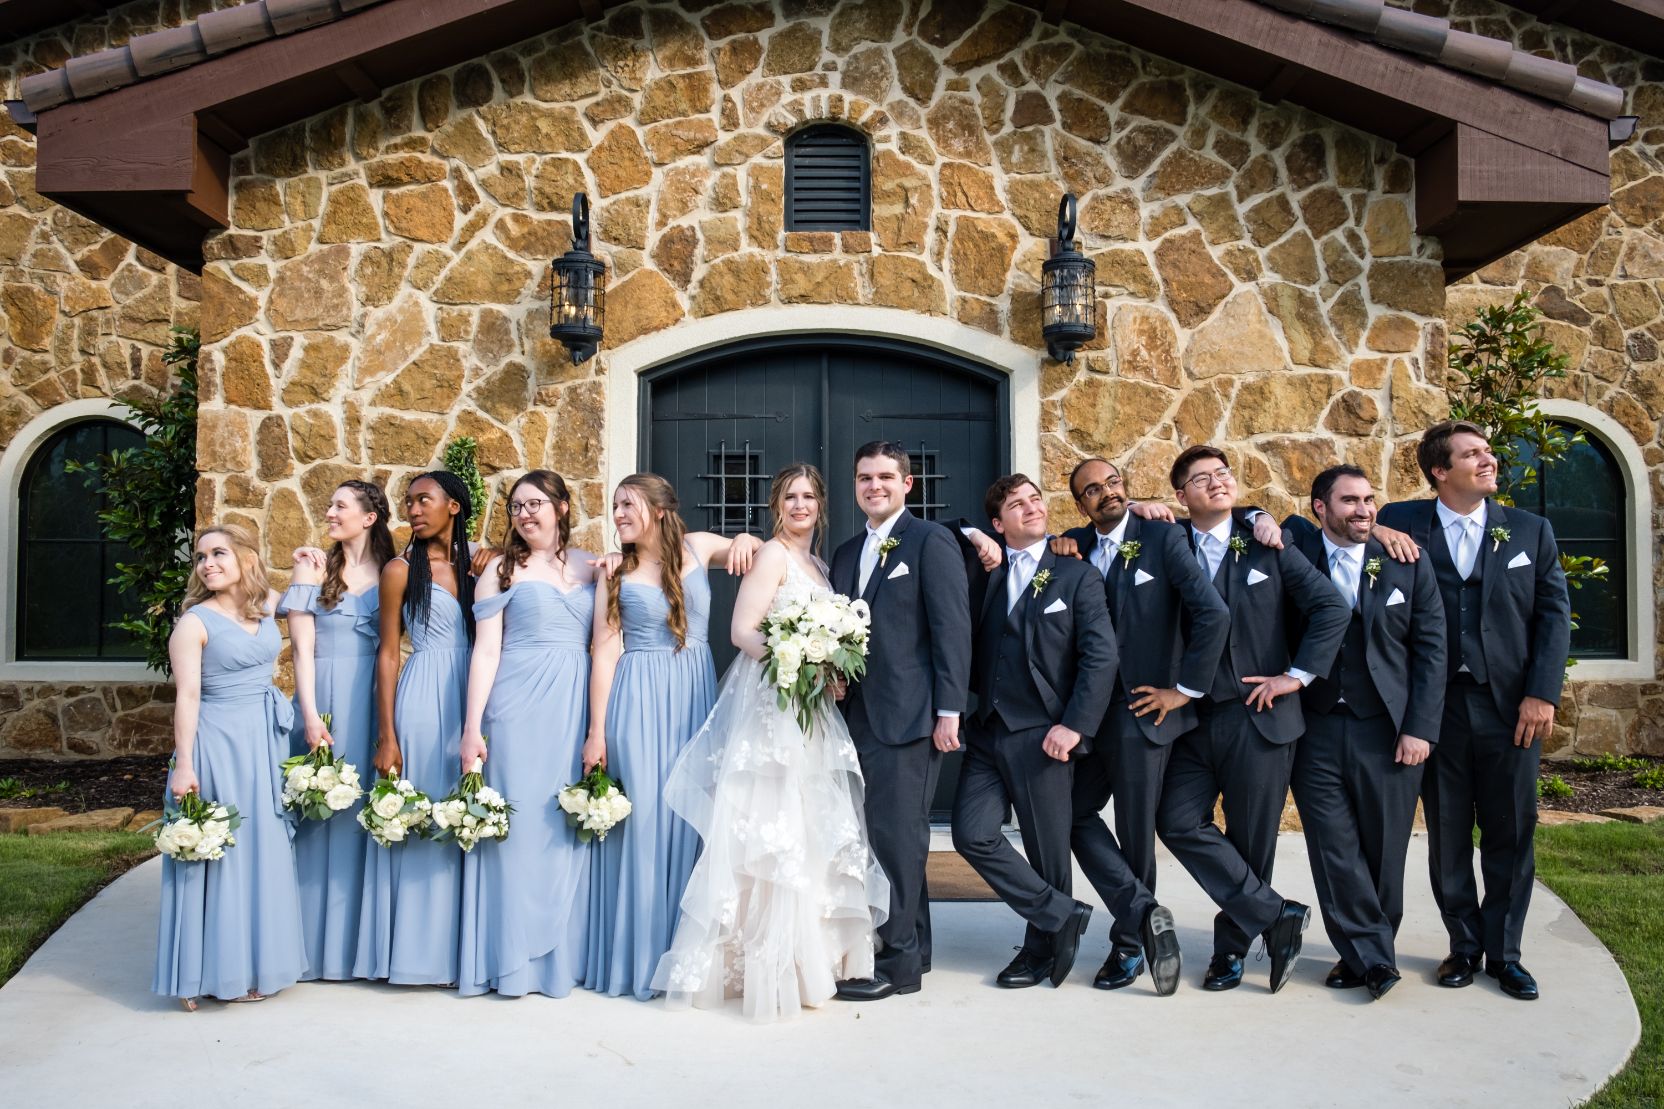 A bridal party of 12 people stand in front of a rock faced building with large lanterns and black double doors. 